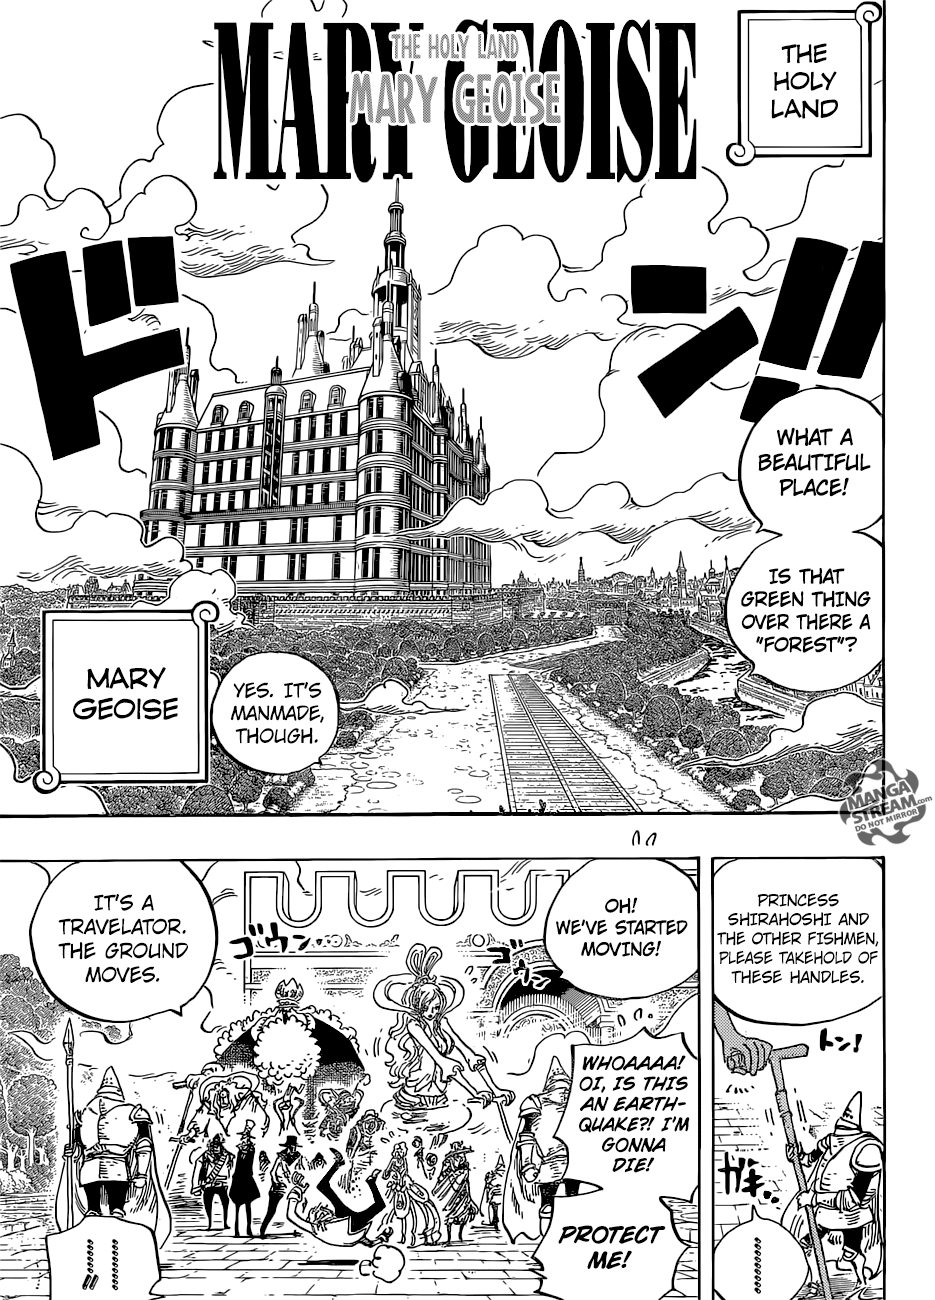 One Piece, Chapter 906 - The Holy Land Mary Geoise image 04